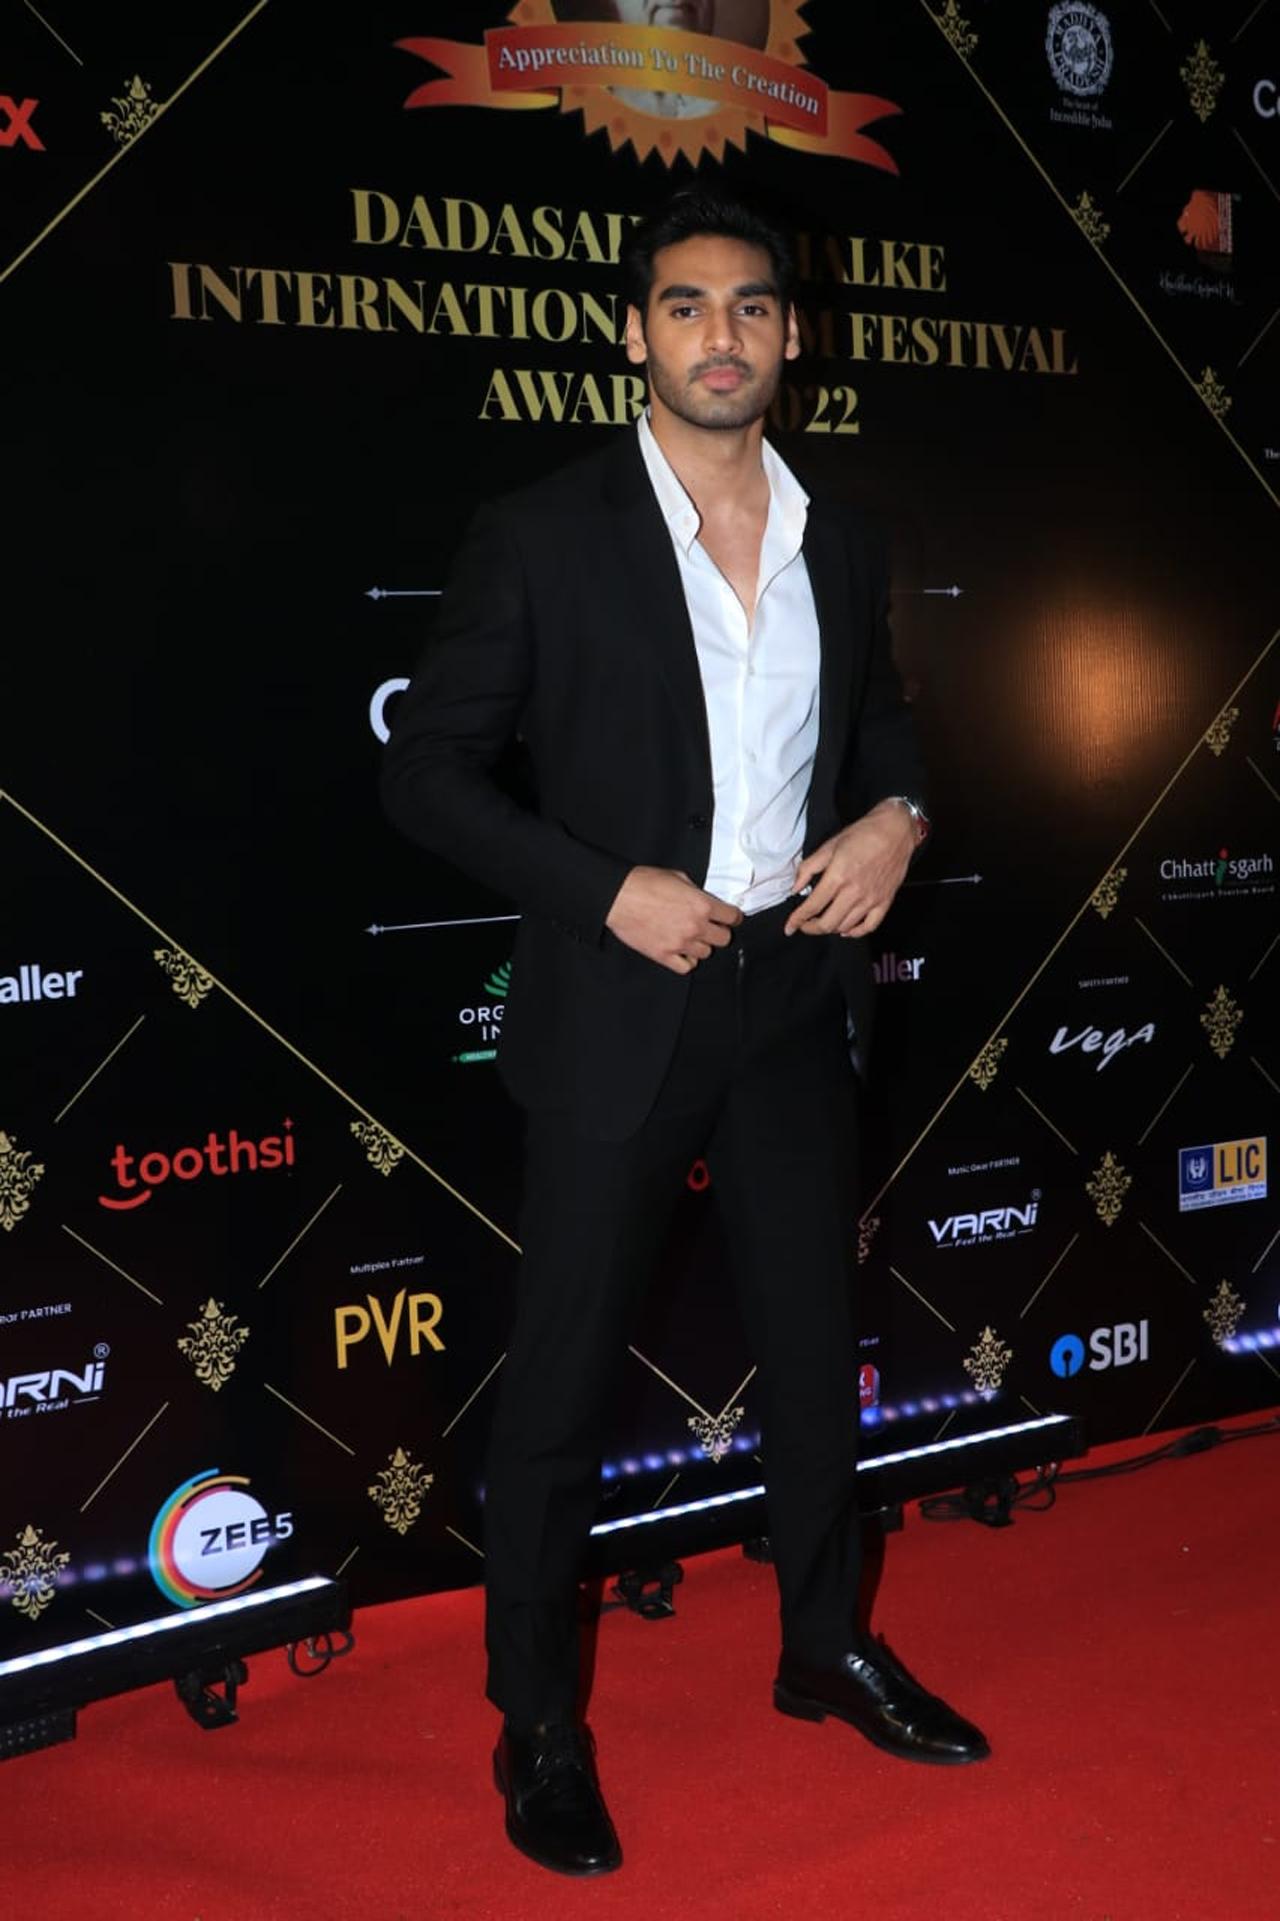 The star-studded night honoured the talented artists for their outstanding contribution to Indian cinema. Ahan Shetty, who made his acting debut with Tadap, also attended the red carpet ceremony.